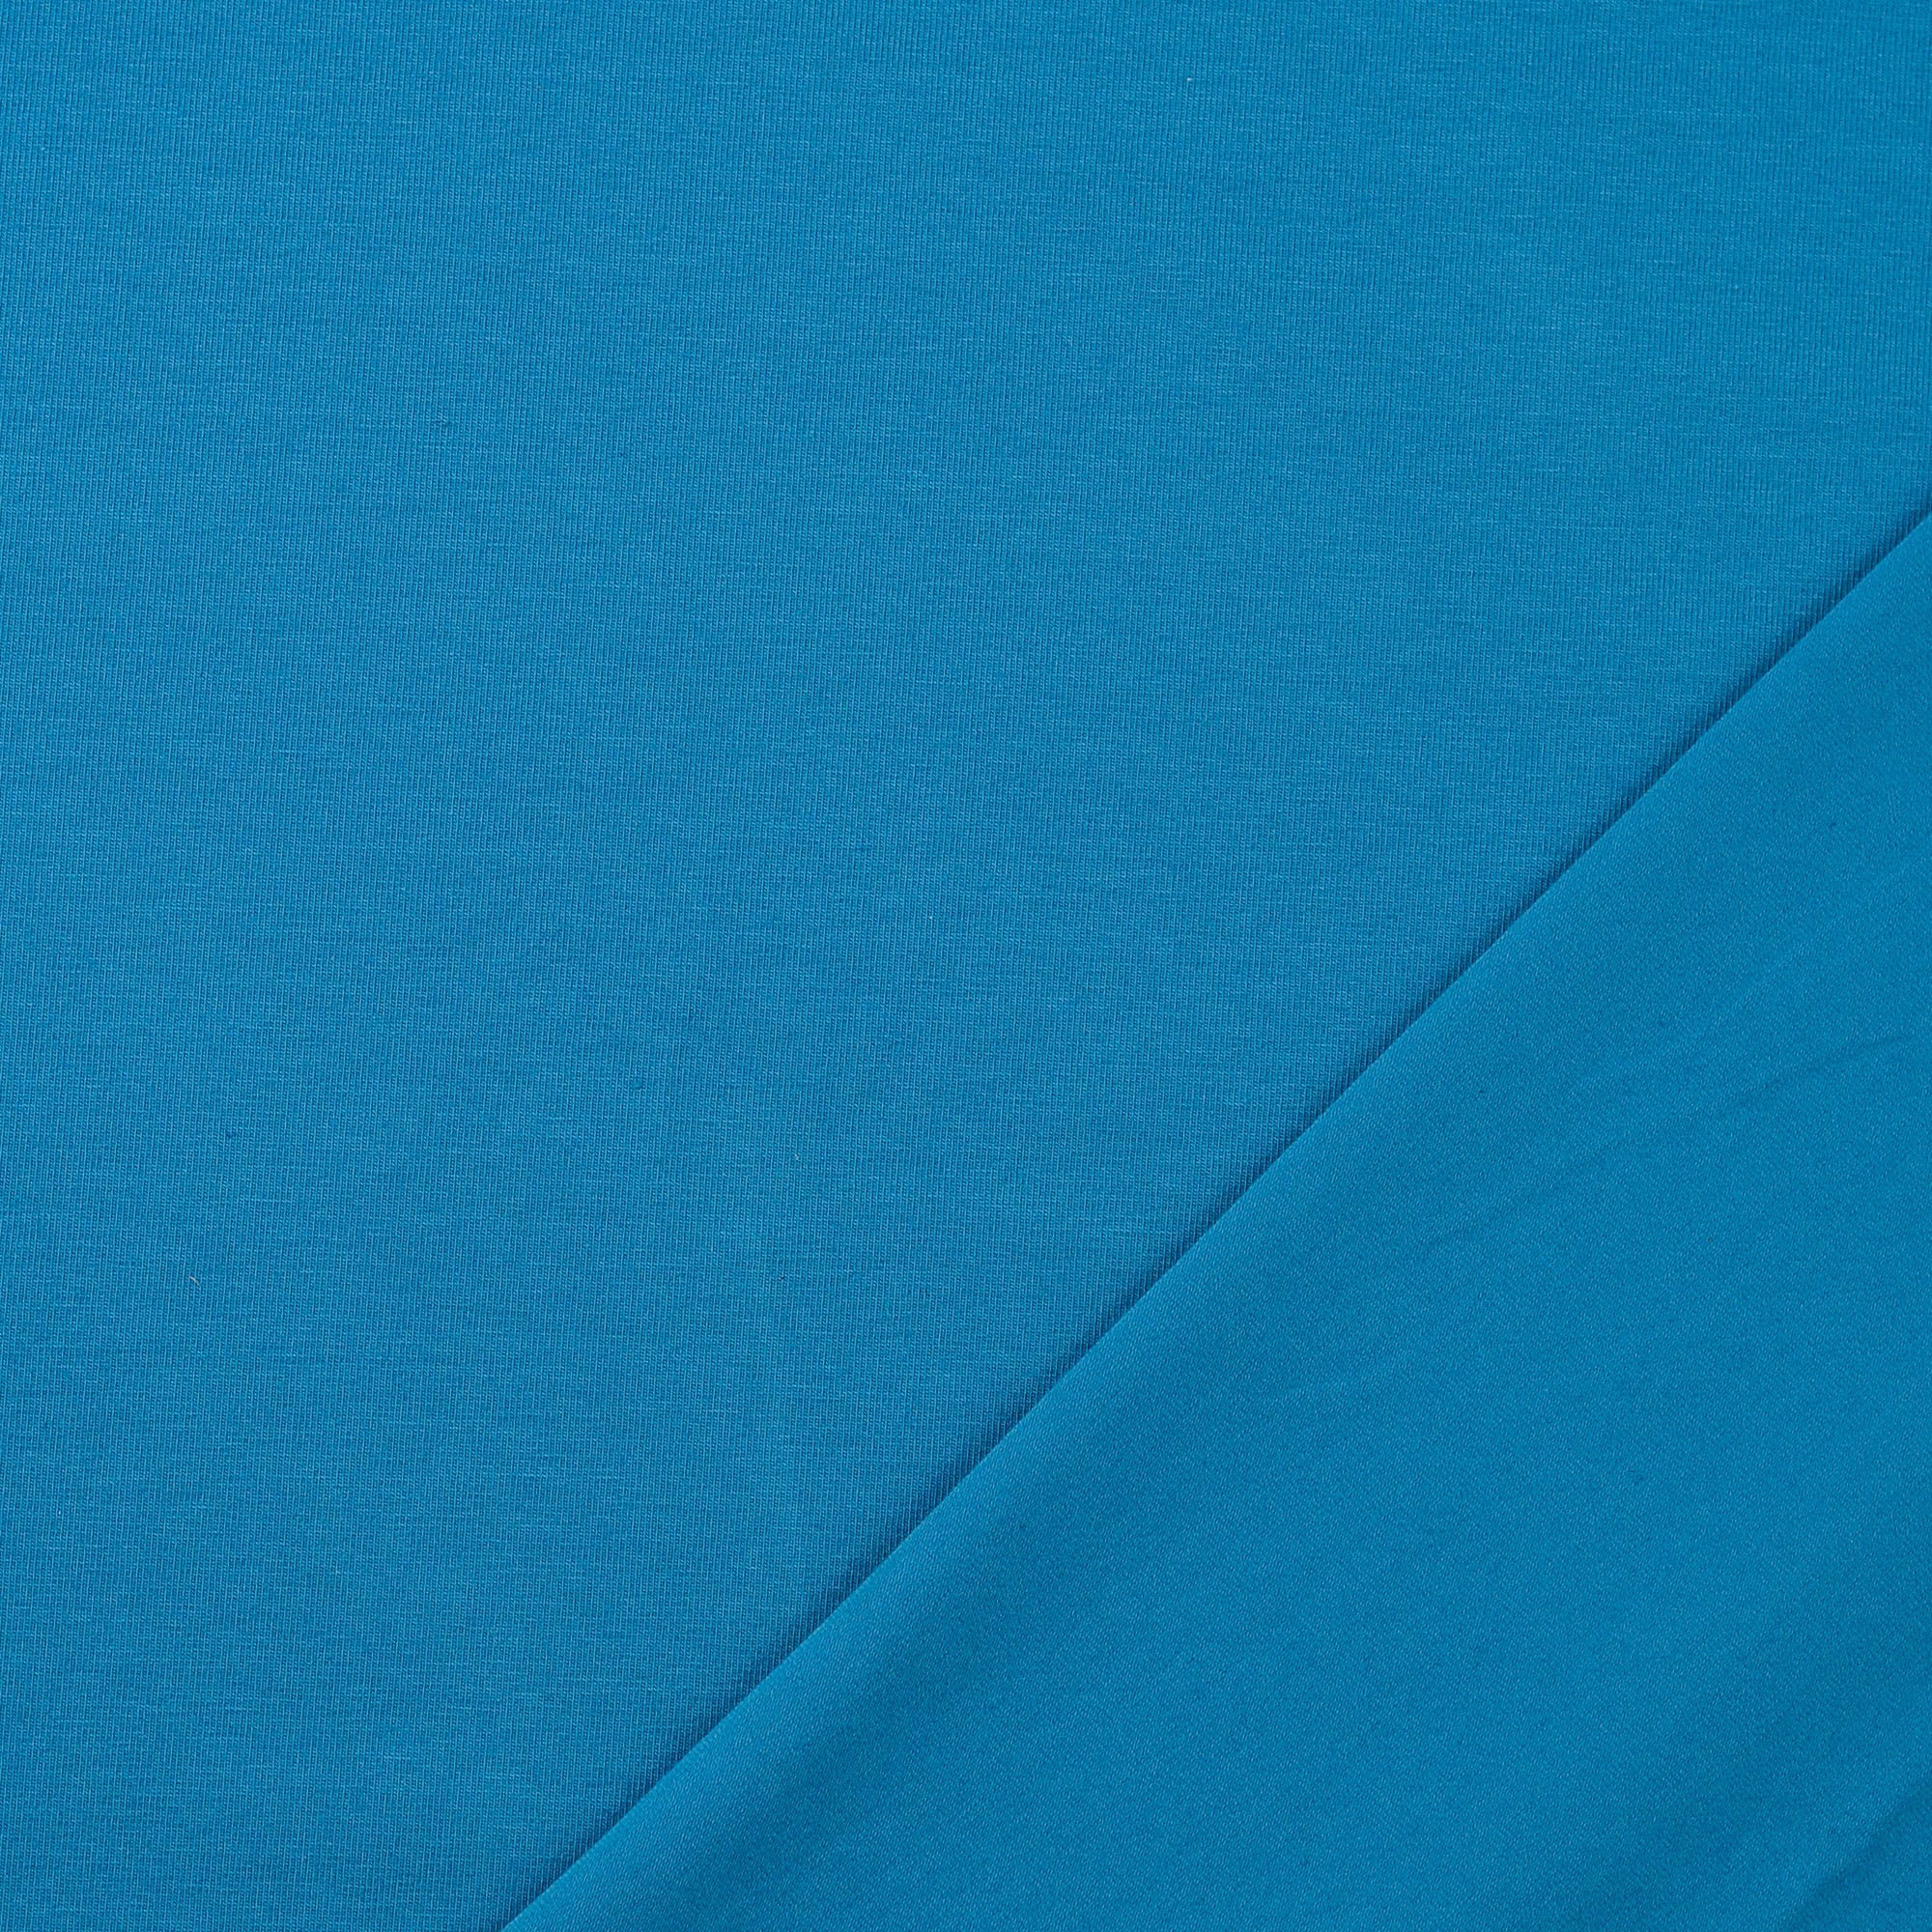 REMNANT 1.54 Metres - Essential Chic Ocean Blue Cotton Jersey Fabric